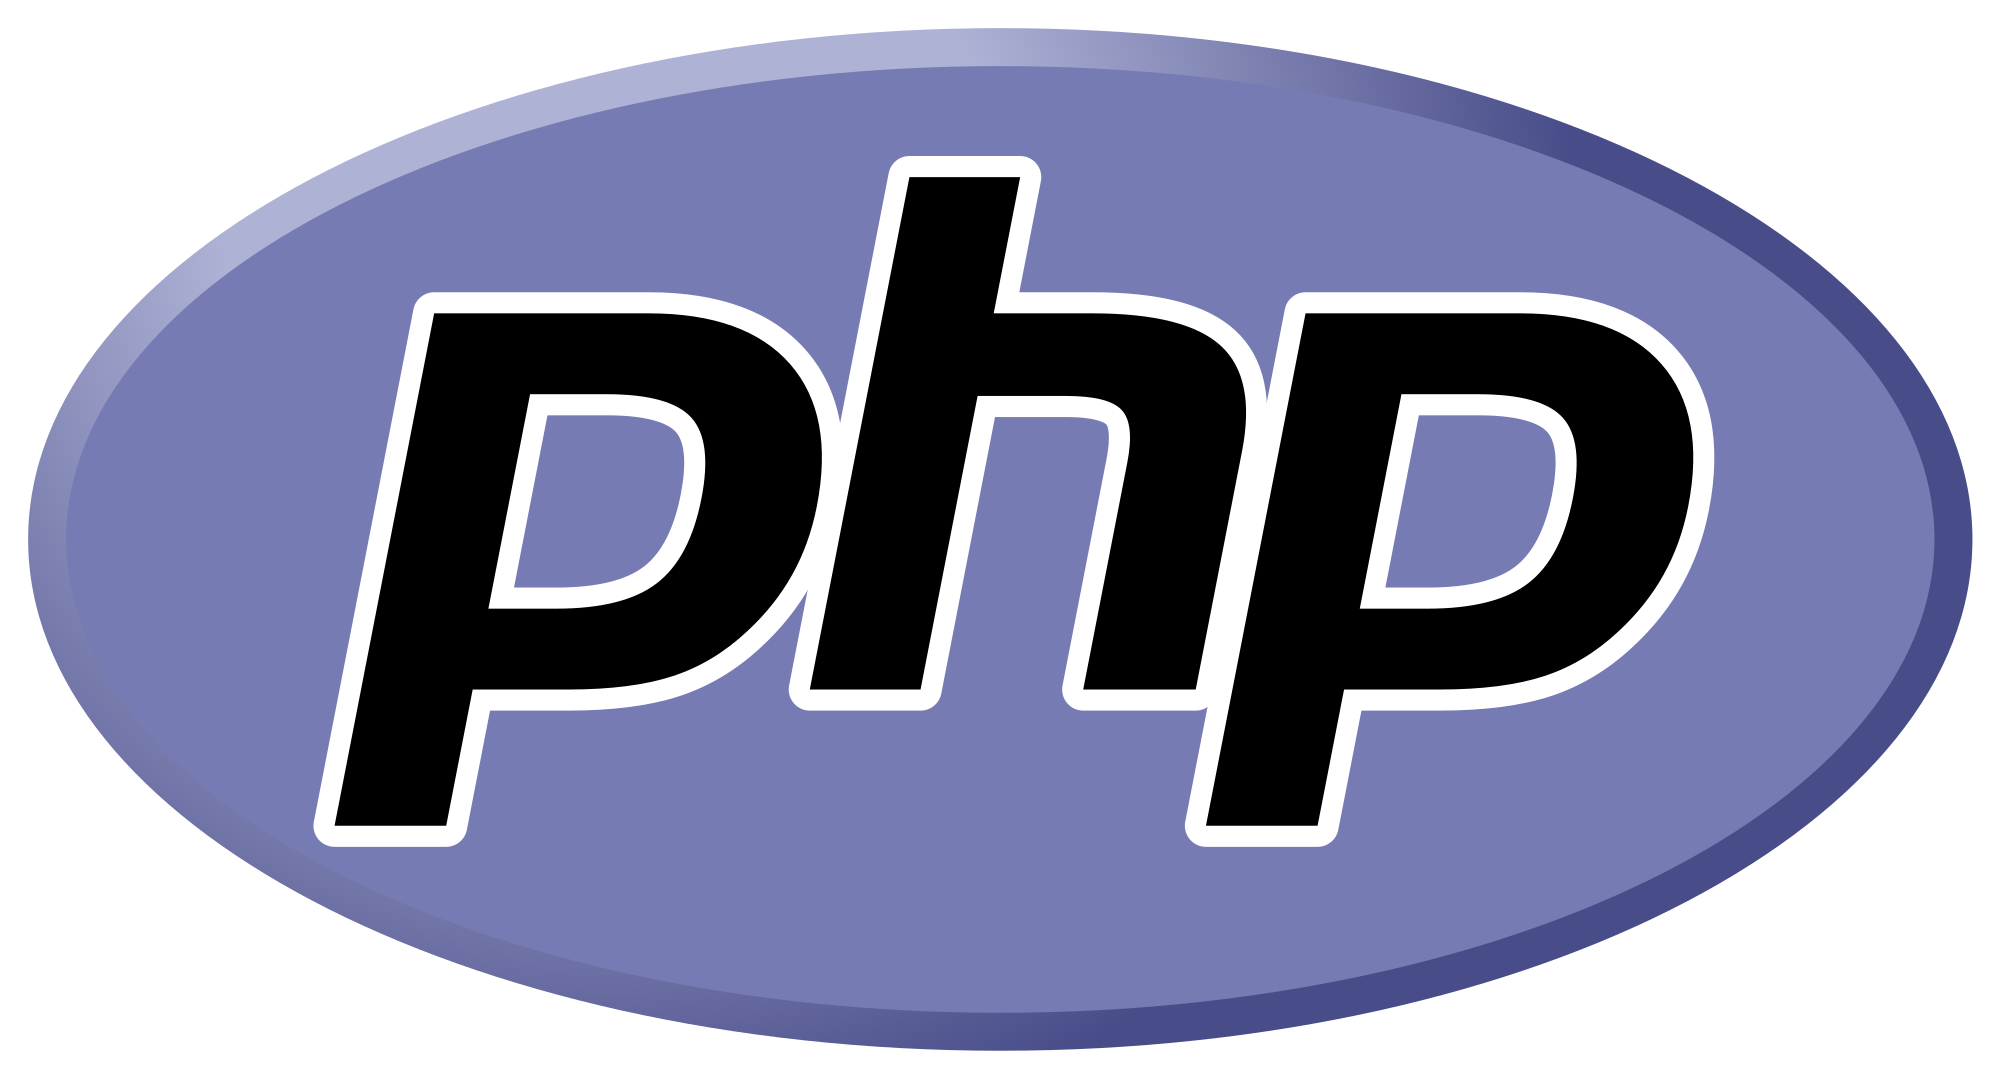 Variable Variables in PHP